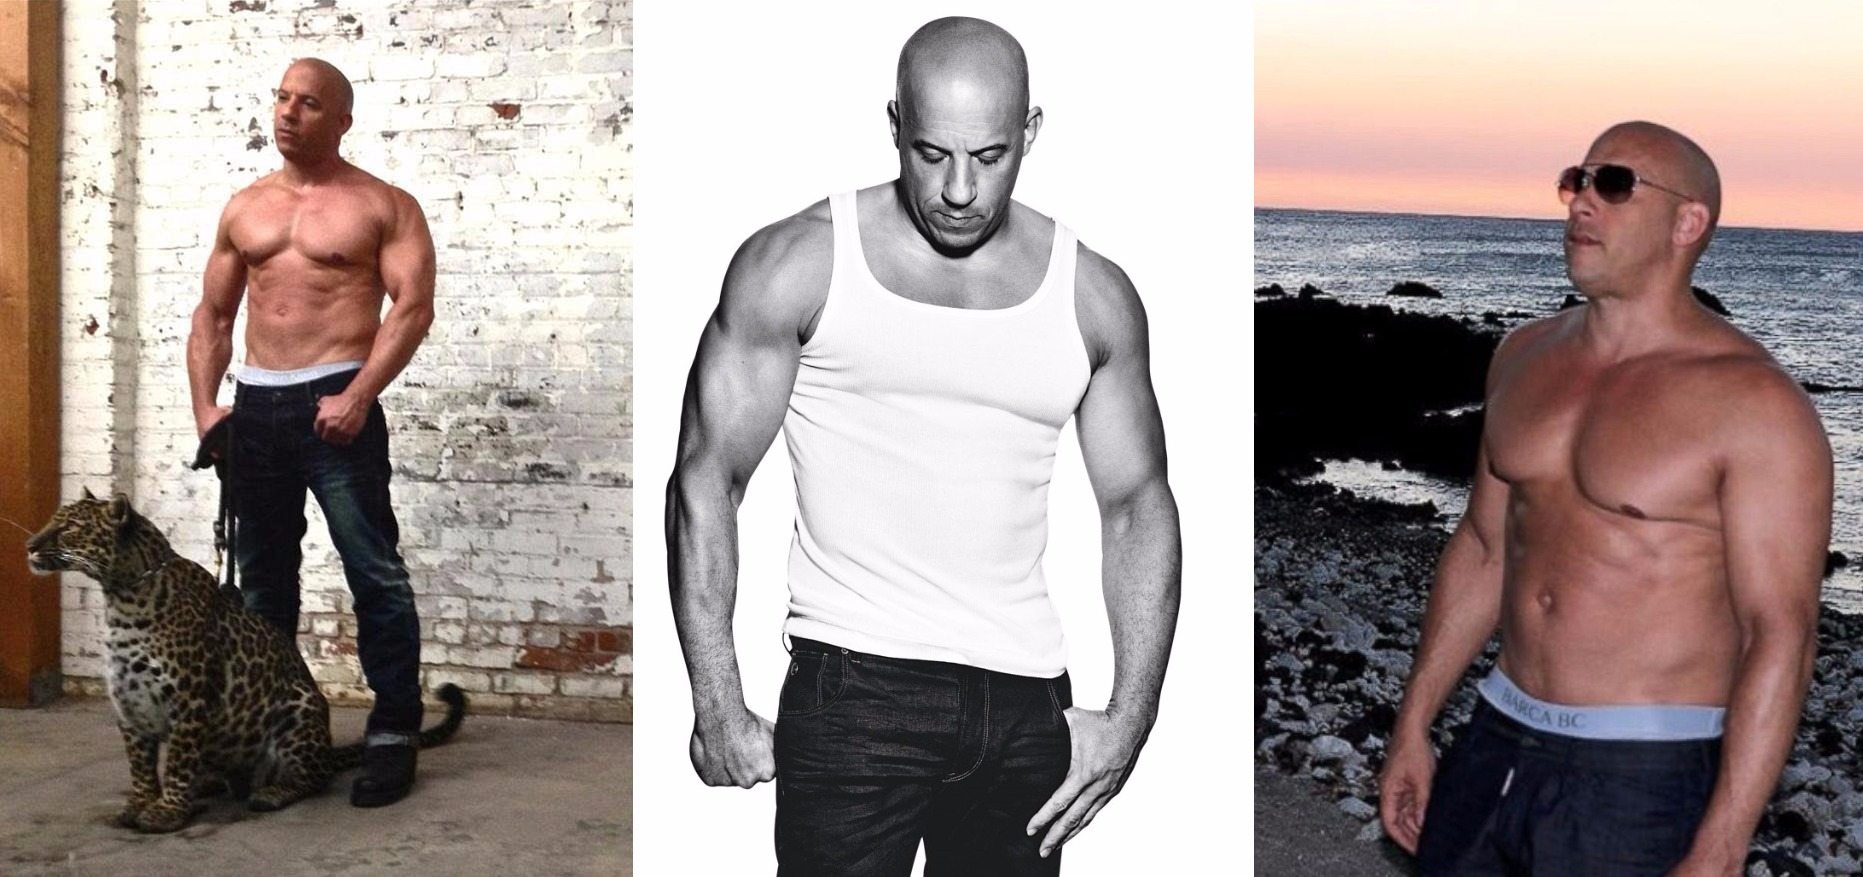 Vin Diesel Real Height: Vin Diesel Used Lifts to Look Tall Against Dwayne  Johnson in Fast and Furious? - Sportsmanor